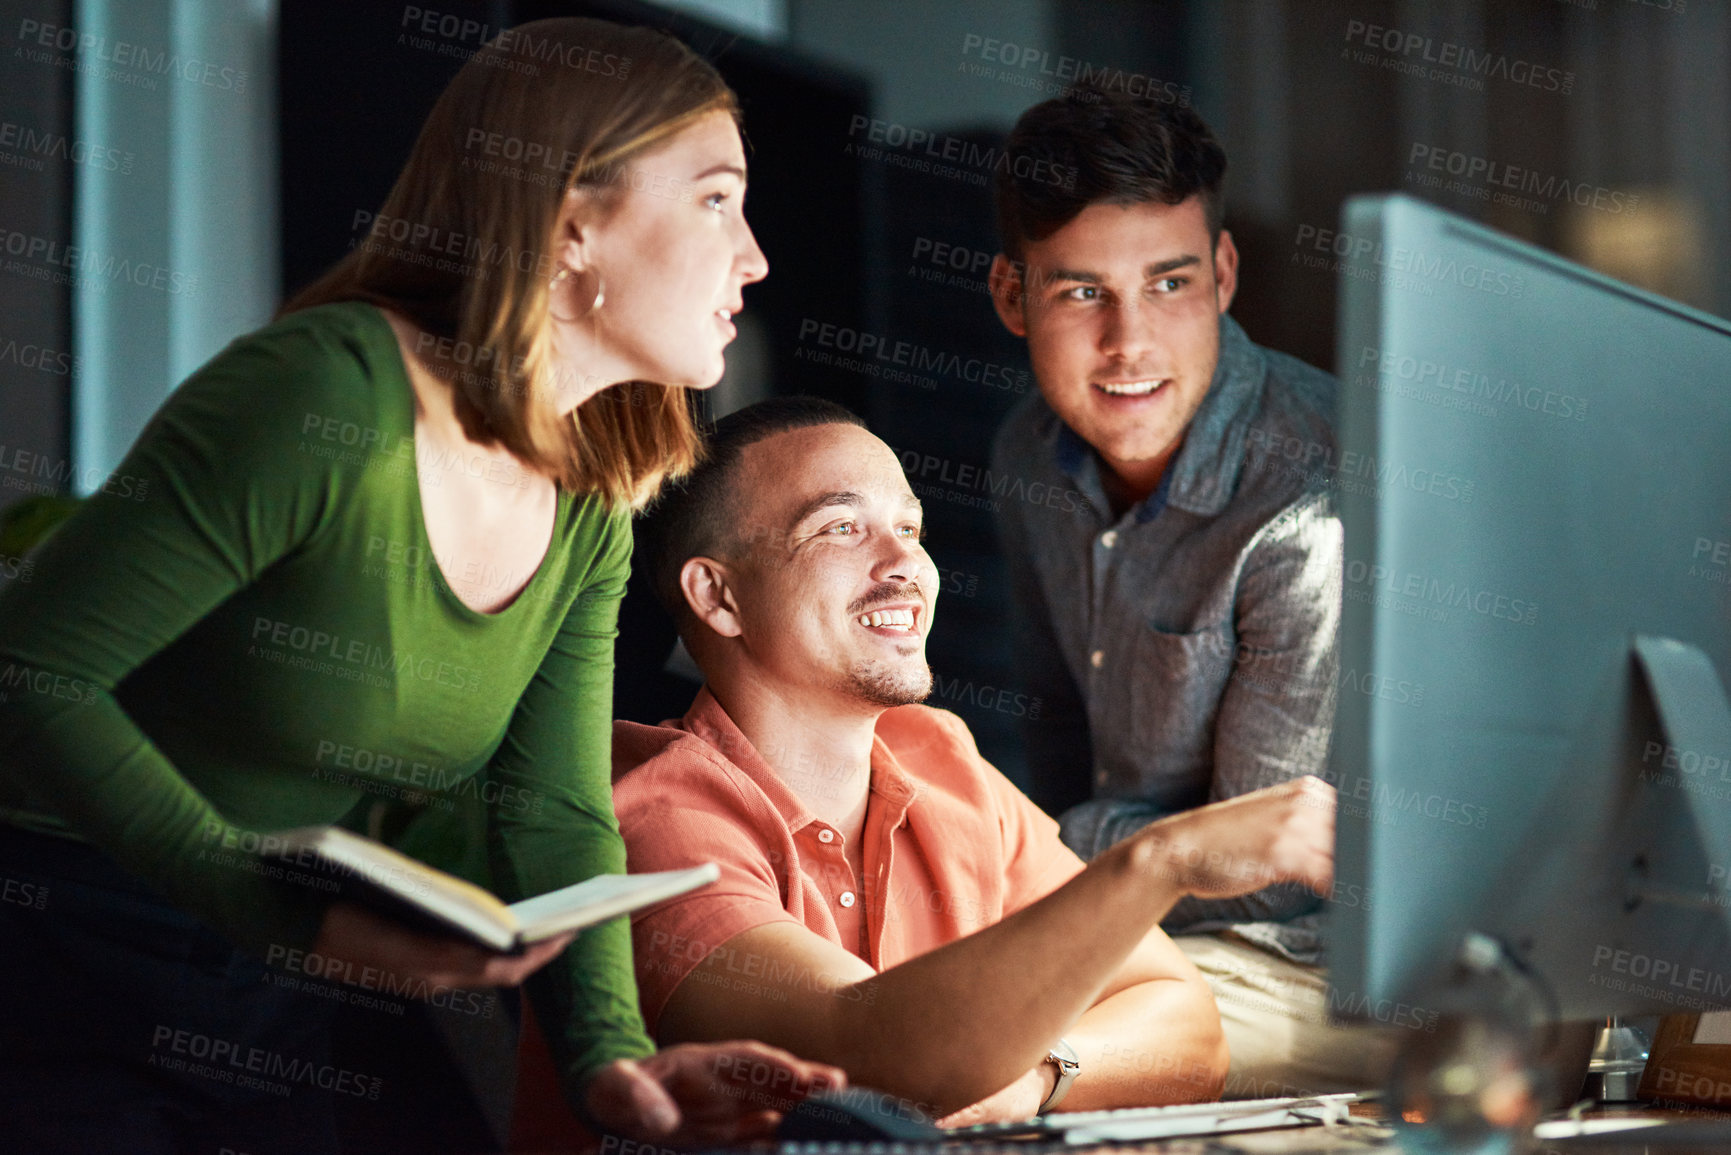 Buy stock photo Shot of a group of designers looking at something on a computer while working late